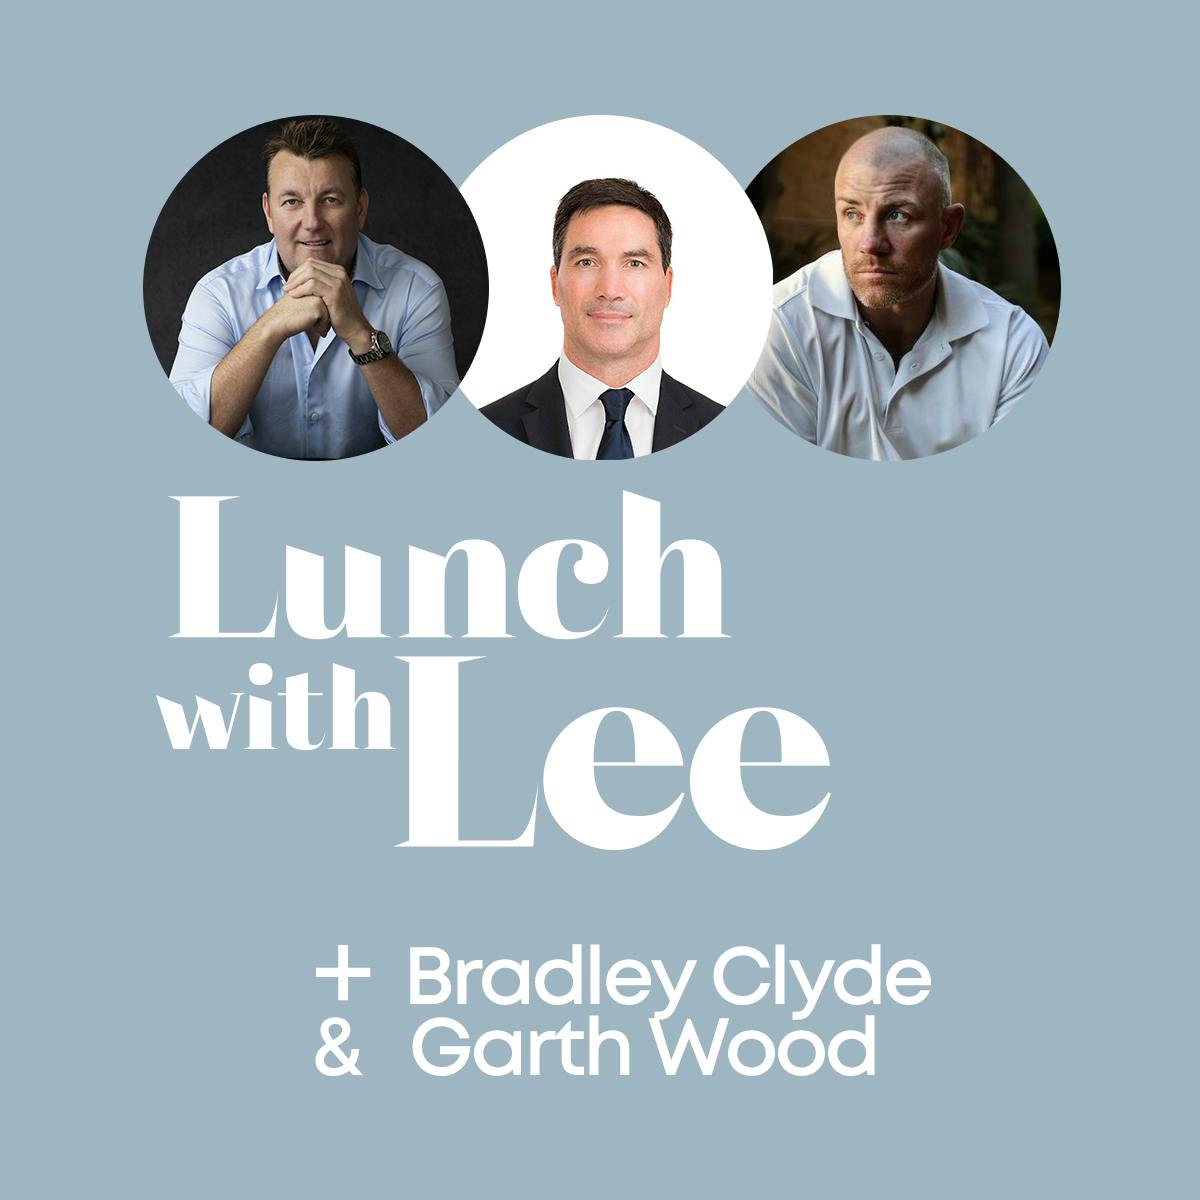 Lunch with Bradley Clyde & Garth Wood